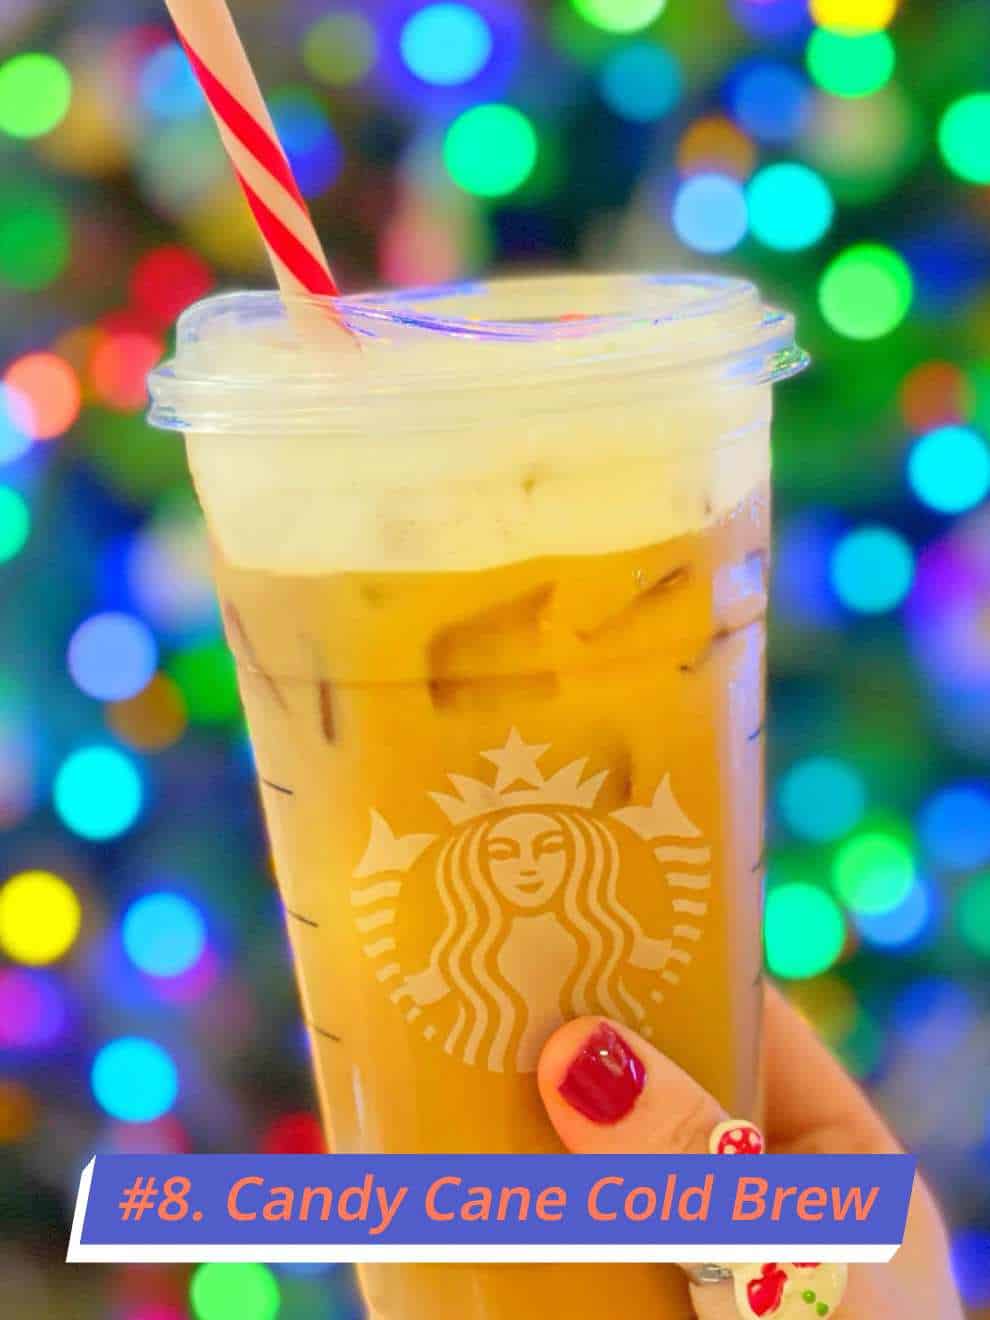 Starbucks Candy Cane Cold Brew